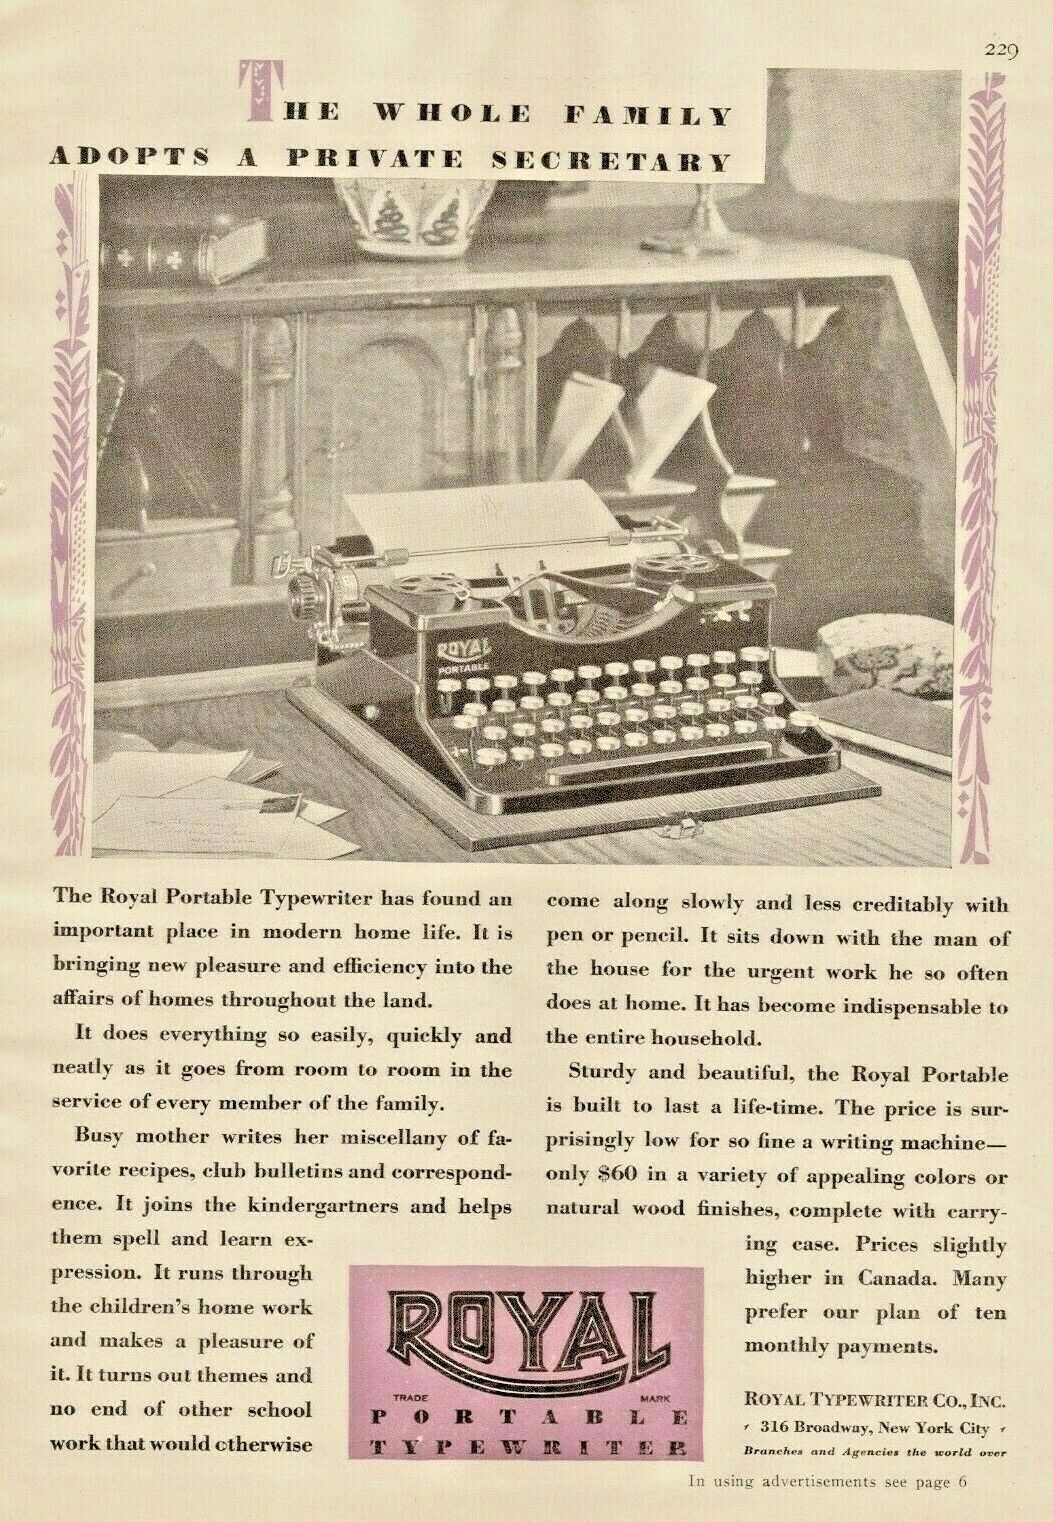 1928 Royal Typewriter Vintage Print Ad Whole Family Adopts A Private Secretary 